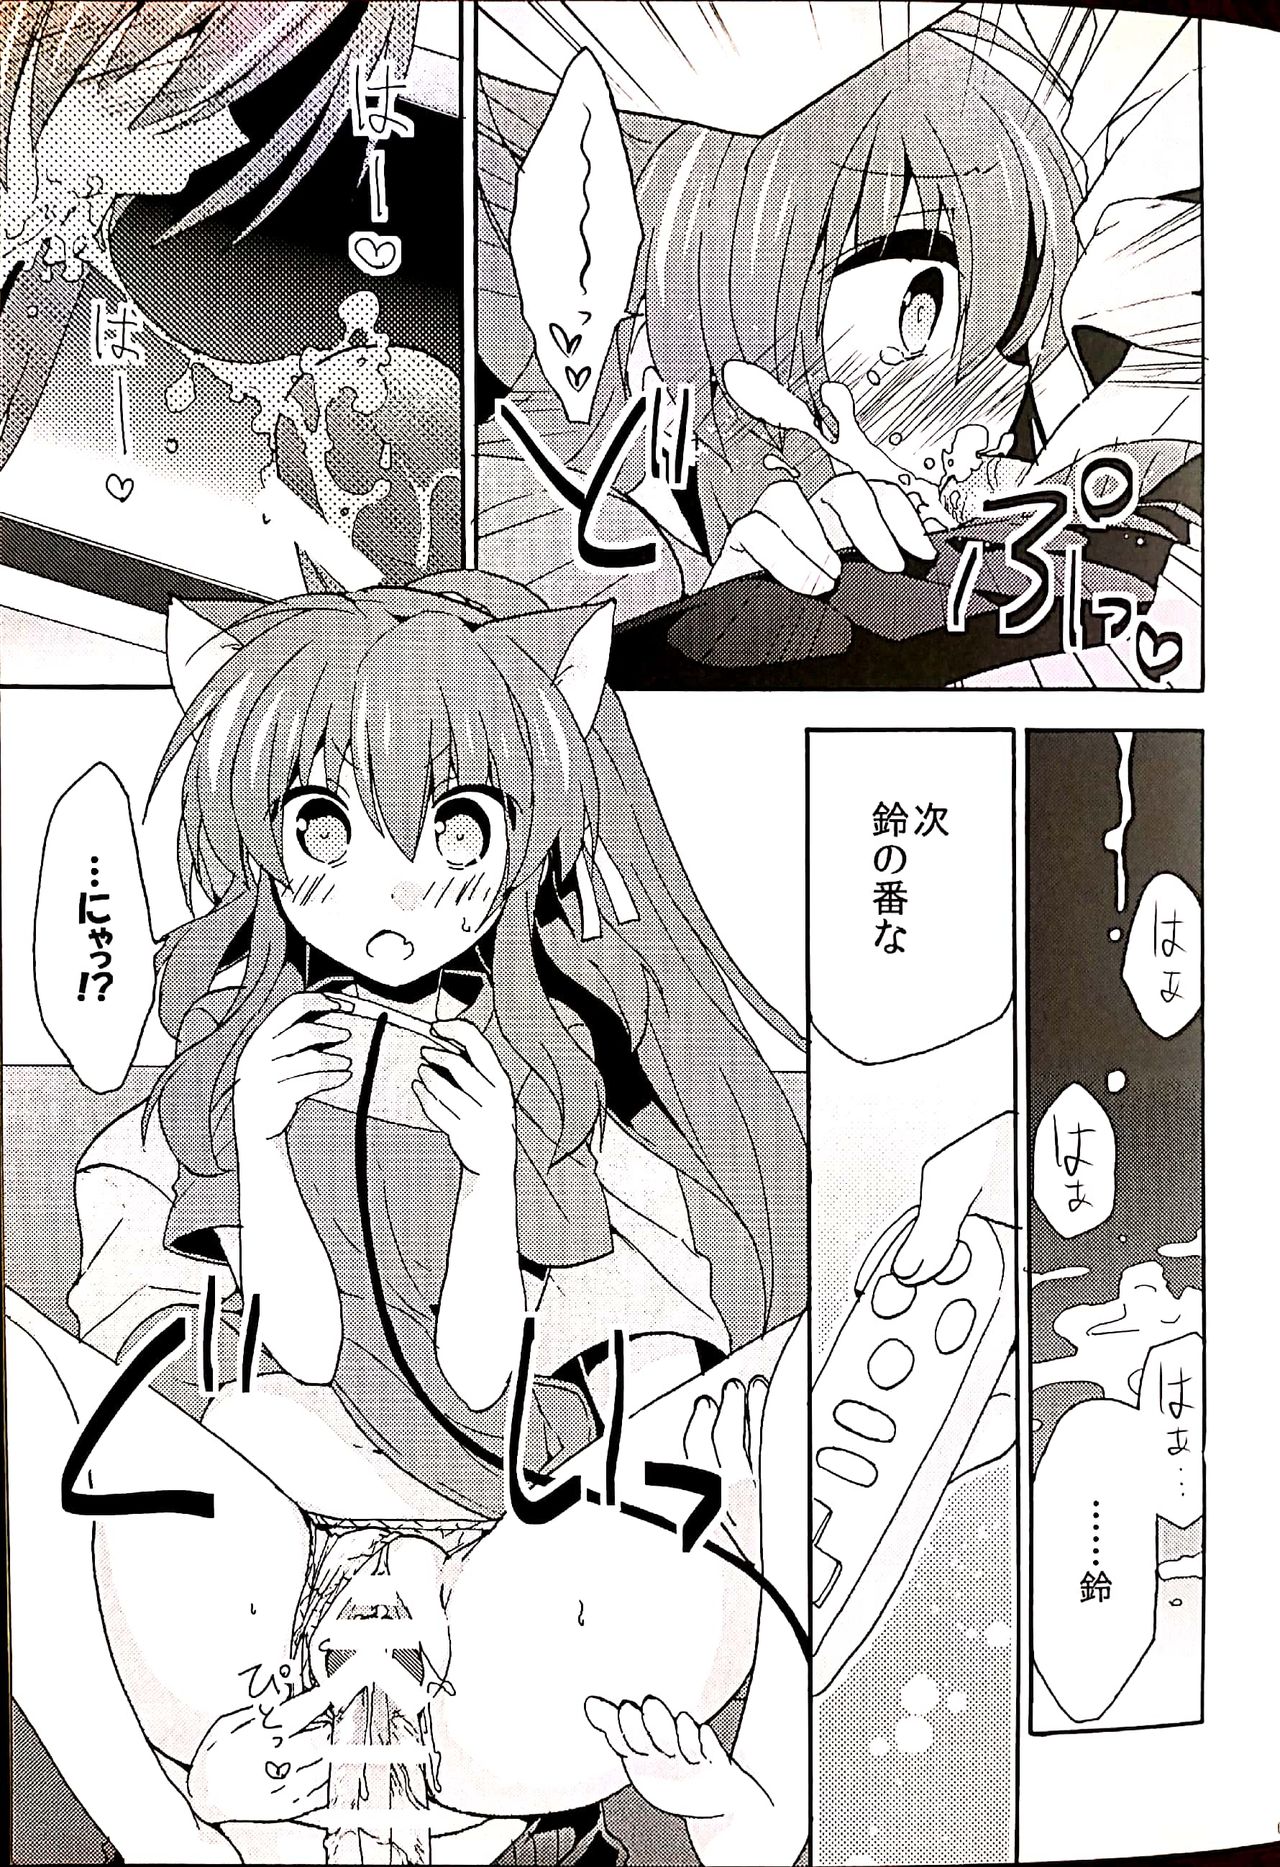 (KeyPoints5) [keepON (Hano Haruka)] 2P (Little Busters!) page 6 full